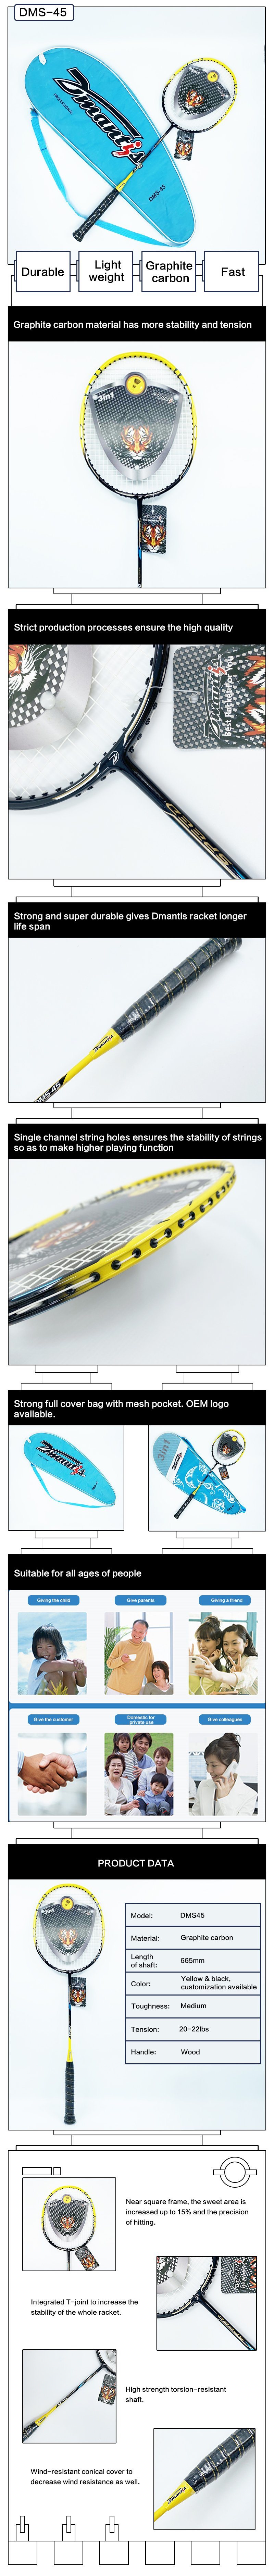 High Quality Customized Logo Half Carbon Graphite Badminton Racket Racquet DMS45 with String Cover Bag